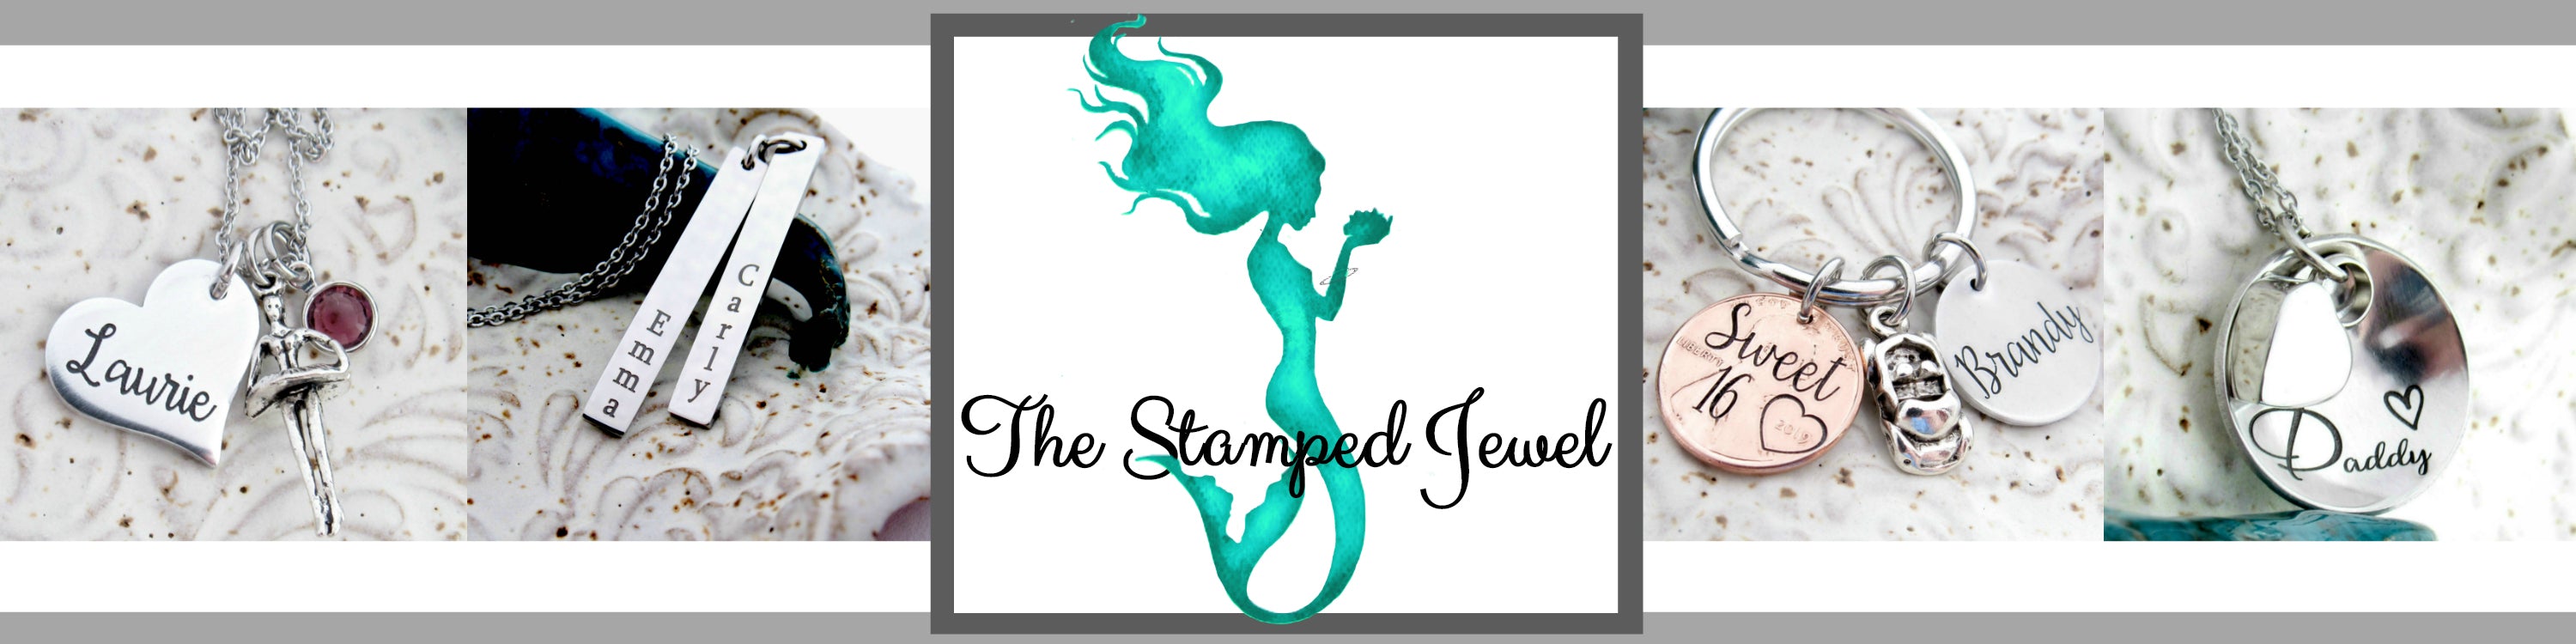 The Stamped Jewel